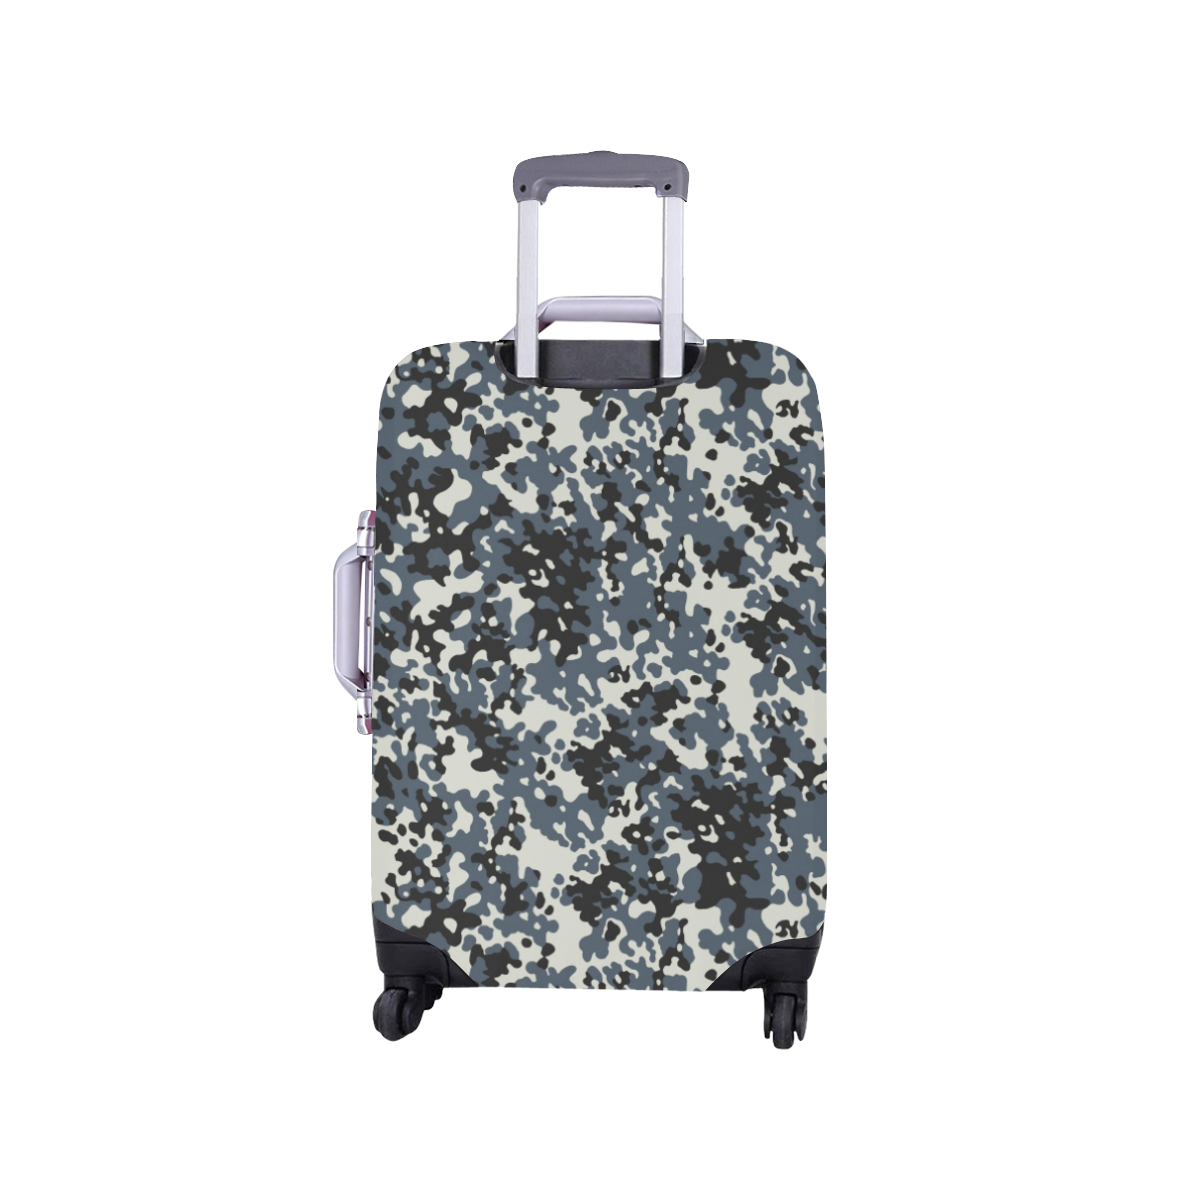 Urban City Black/Gray Digital Camouflage Luggage Cover/Small 18"-21"